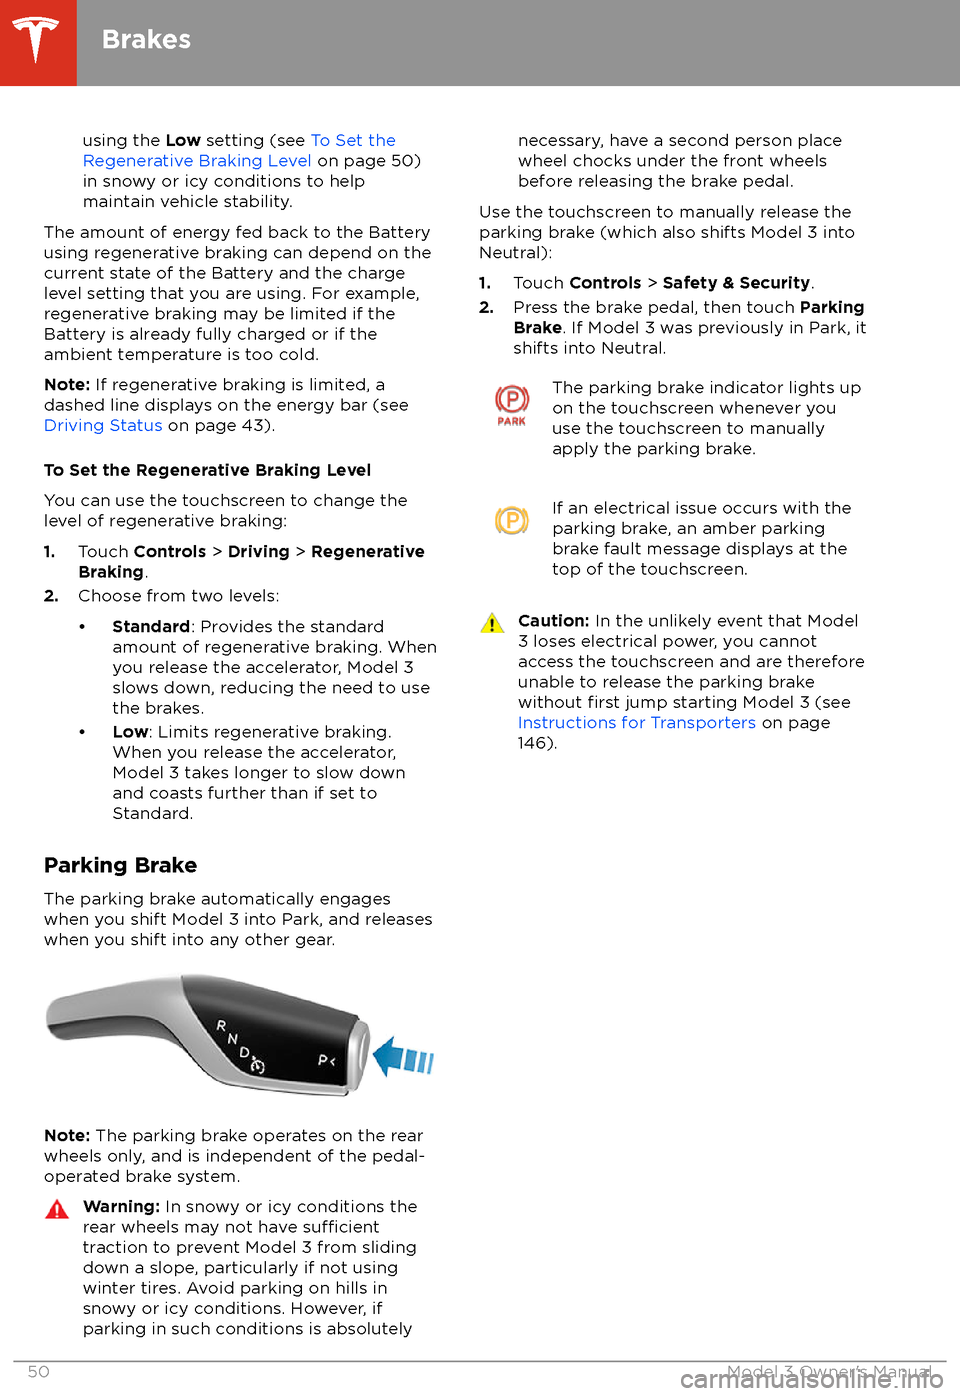 TESLA MODEL 3 2018 Workshop Manual using the Low setting (see  To Set the
Regenerative Braking Level  on page 50)
in snowy or icy conditions to help
maintain vehicle stability.
The amount of energy fed back to the Battery using regener